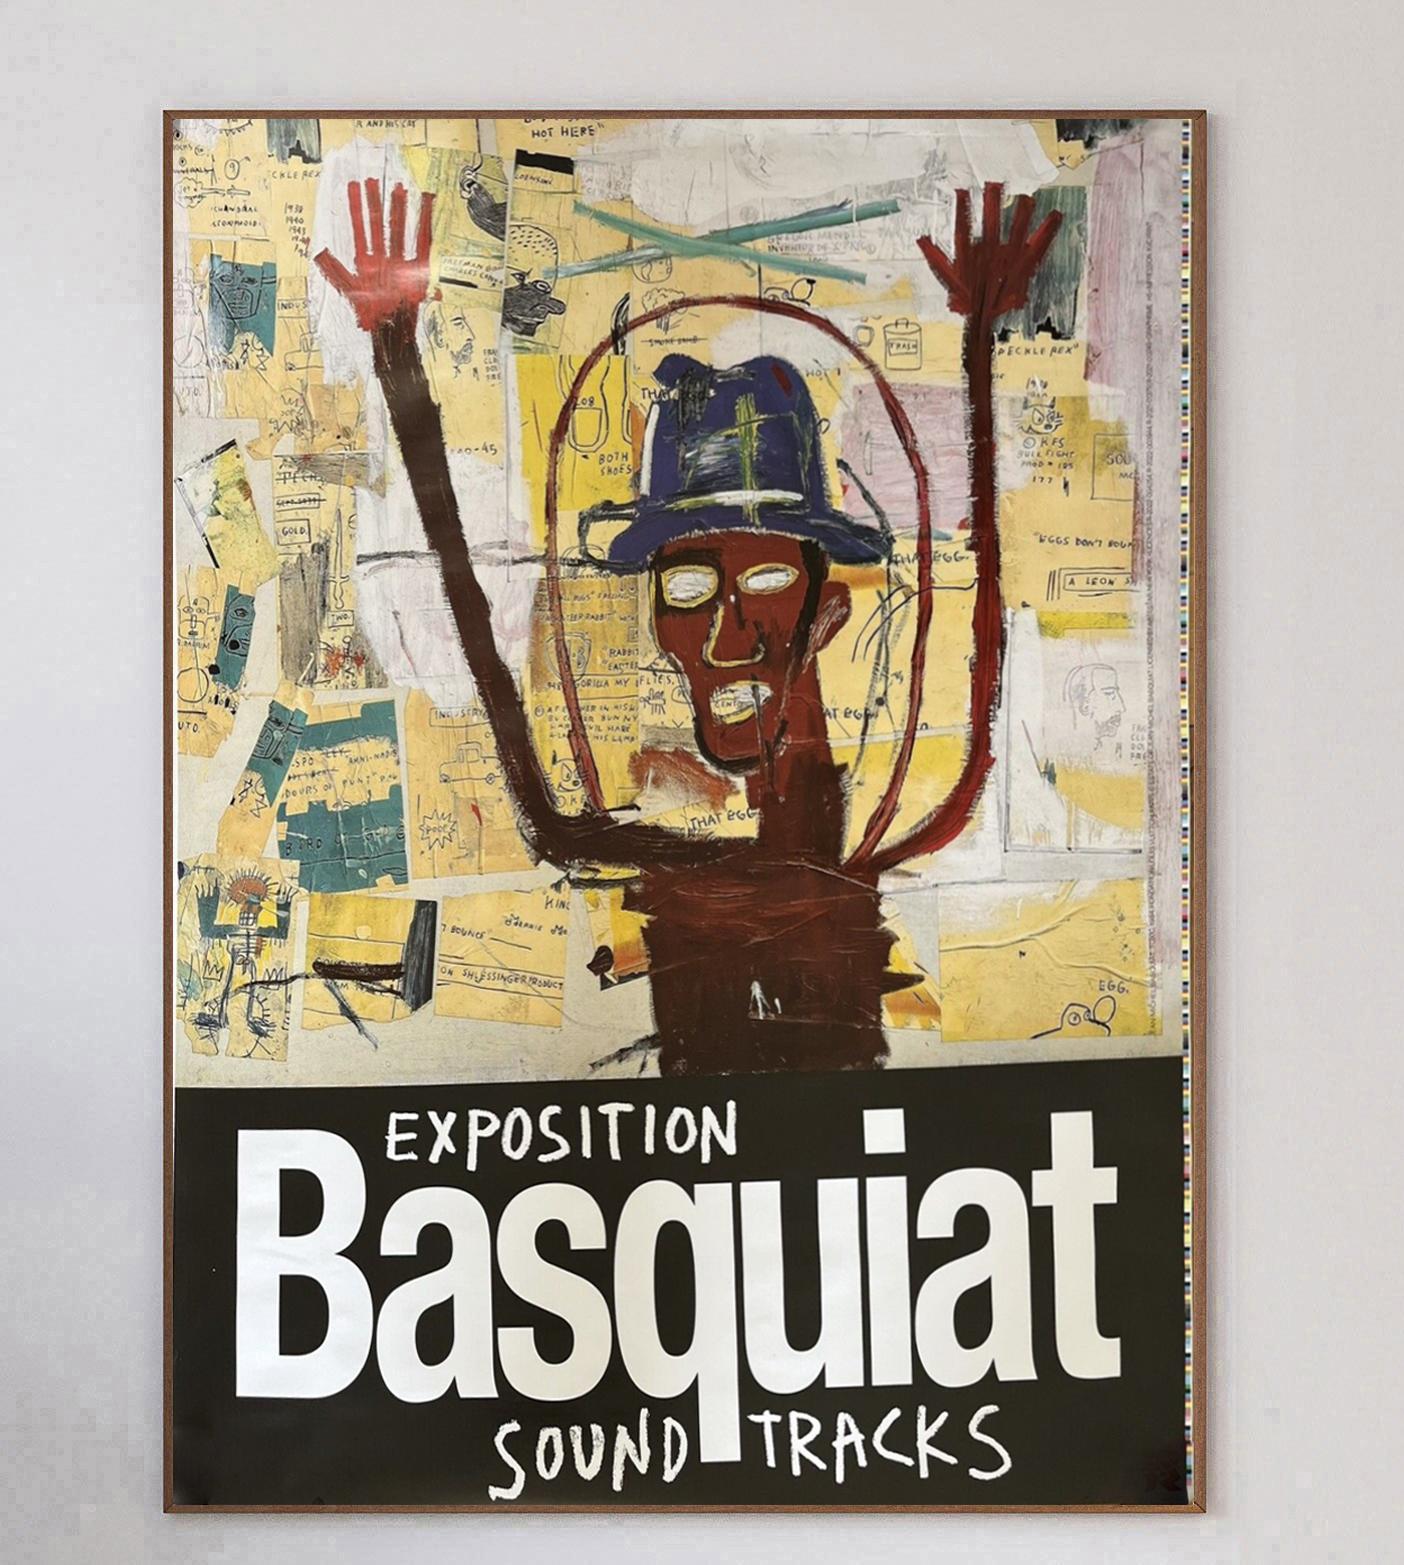 One of the most influential artists of the 20th¬†century, Jean-Michel Basquiat rose to prominence in the 1970s and early 1980s. Achieving so much in such a short space of time, his neo-expressionist artworks were social commentary using painting,